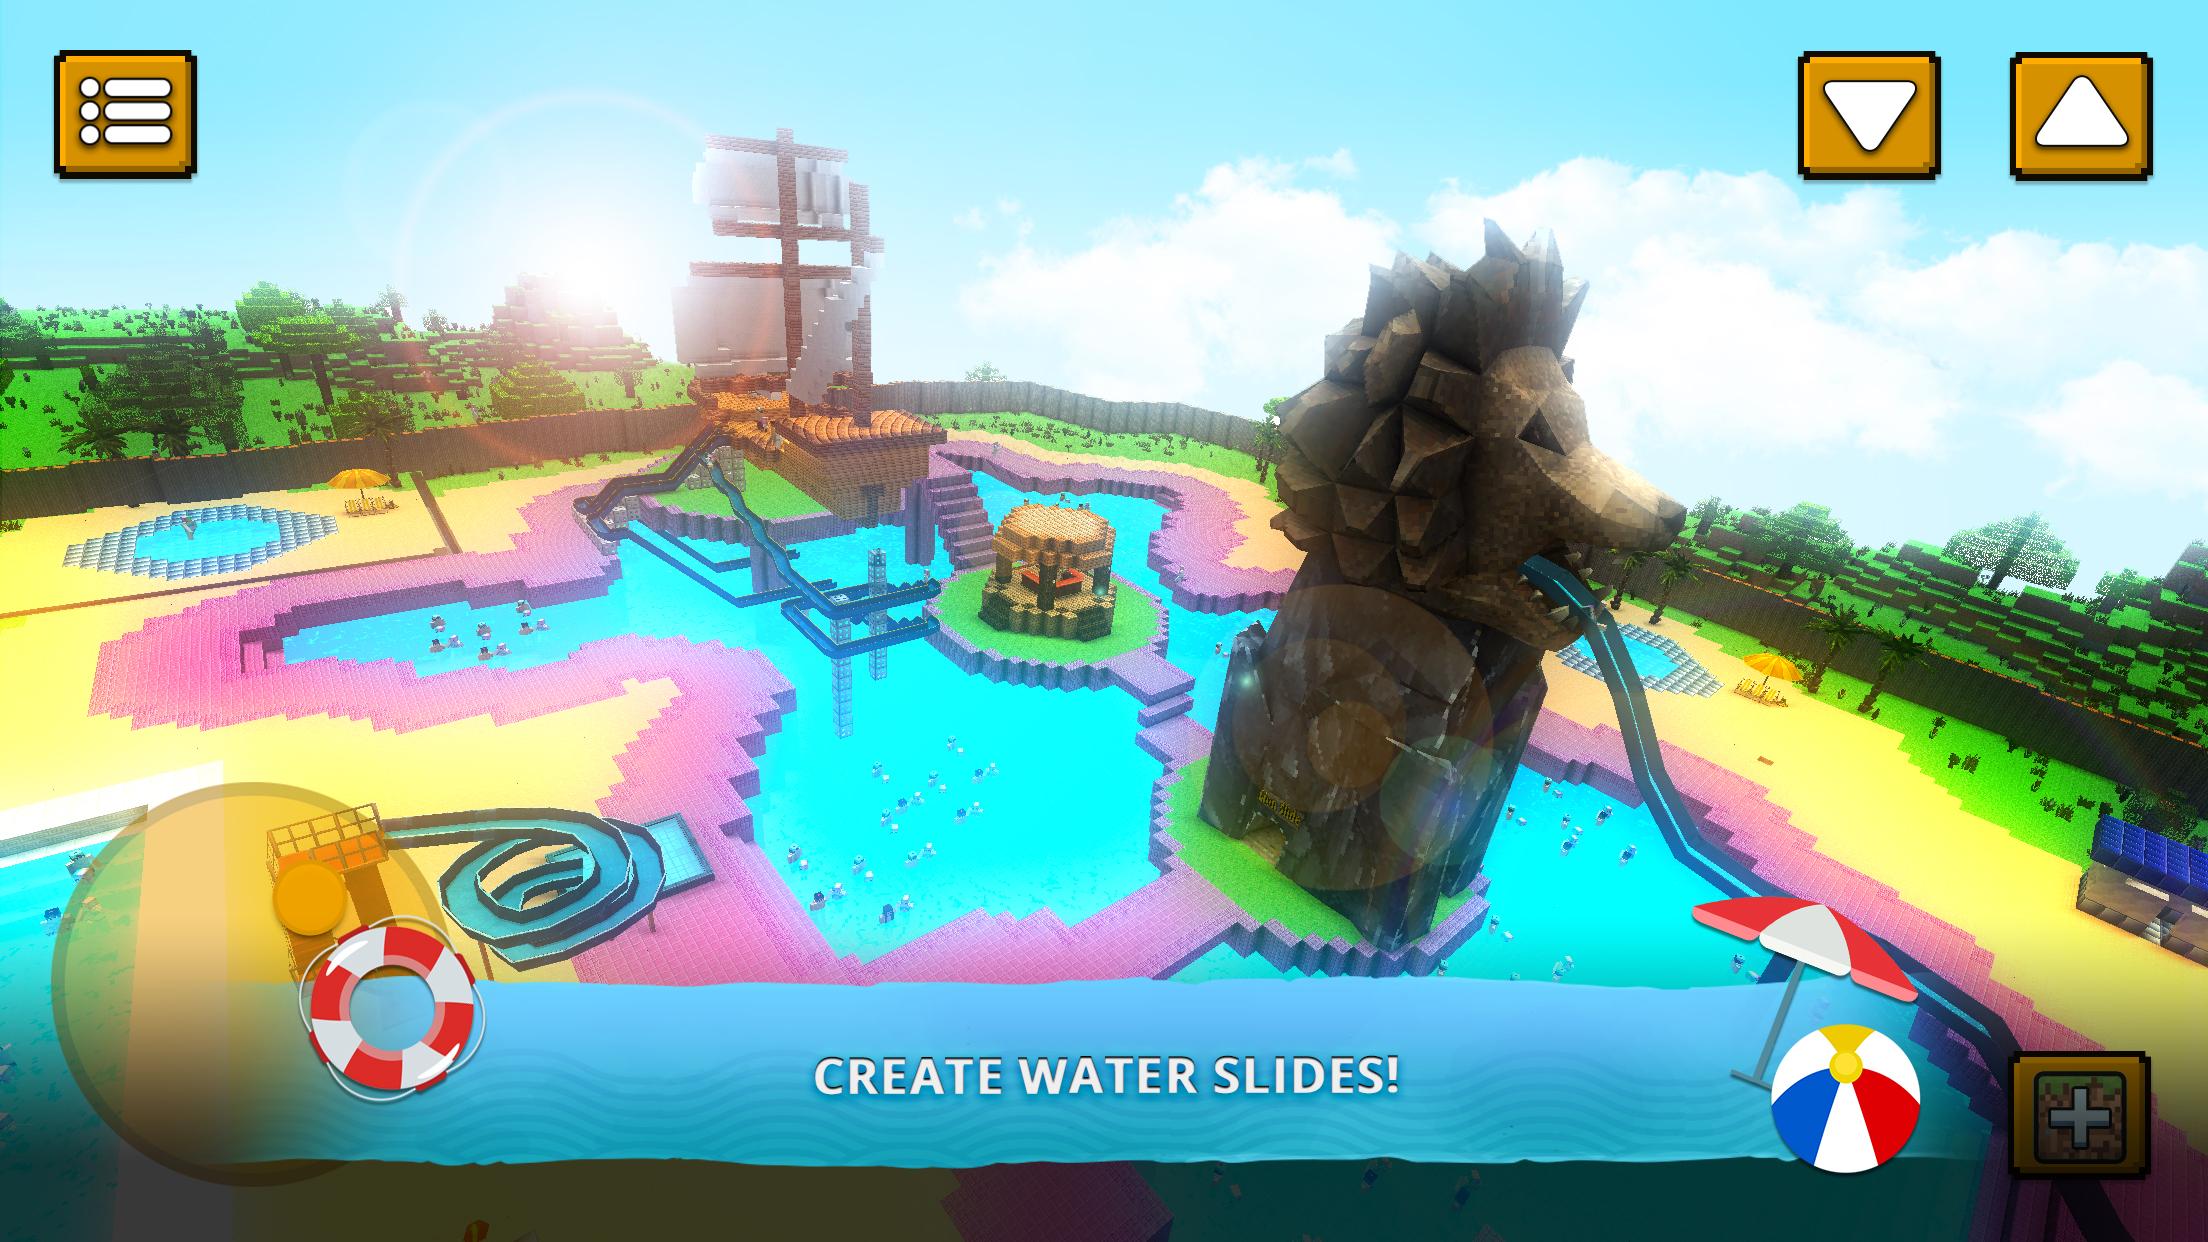 Water Park Craft Go Waterslide Building Adventure Apk 1 16 Minapi23 Download For Android Download Water Park Craft Go Waterslide Building Adventure Apk Latest Version Apkfab Com - roblox tycoon 2 how to build water ride